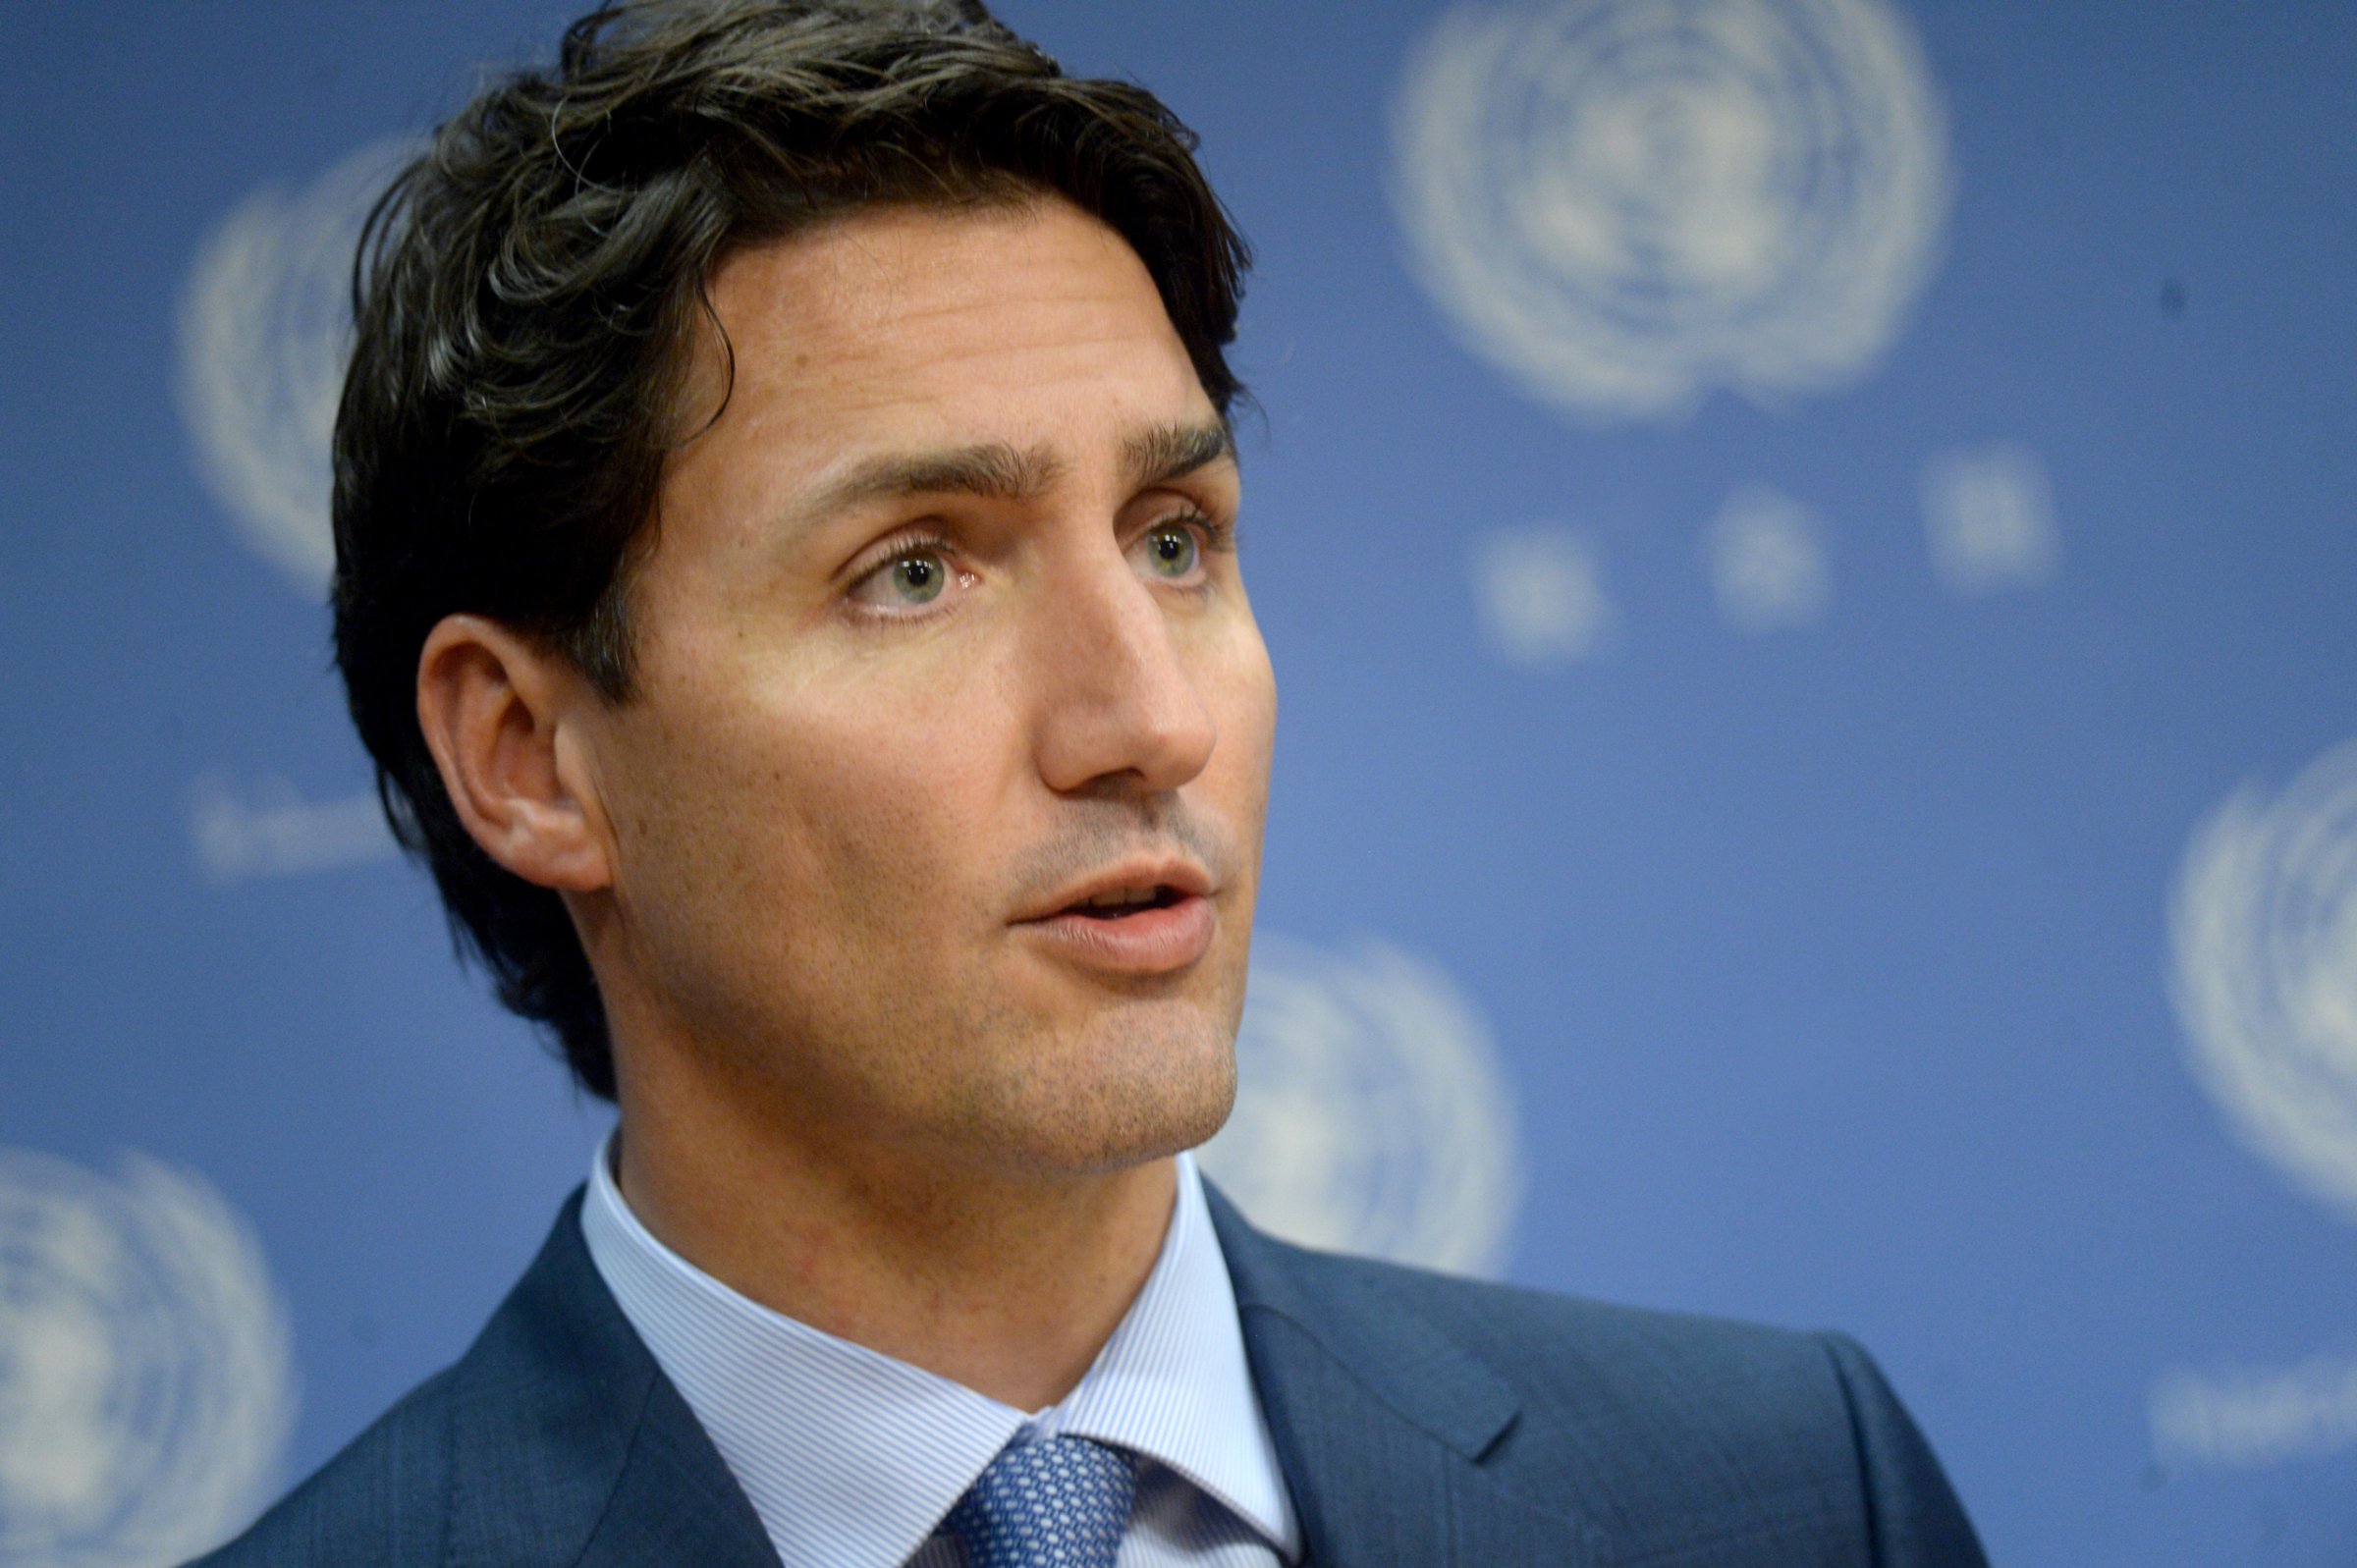 Justin Trudeau Holds A Press Conference At The UN - NYC